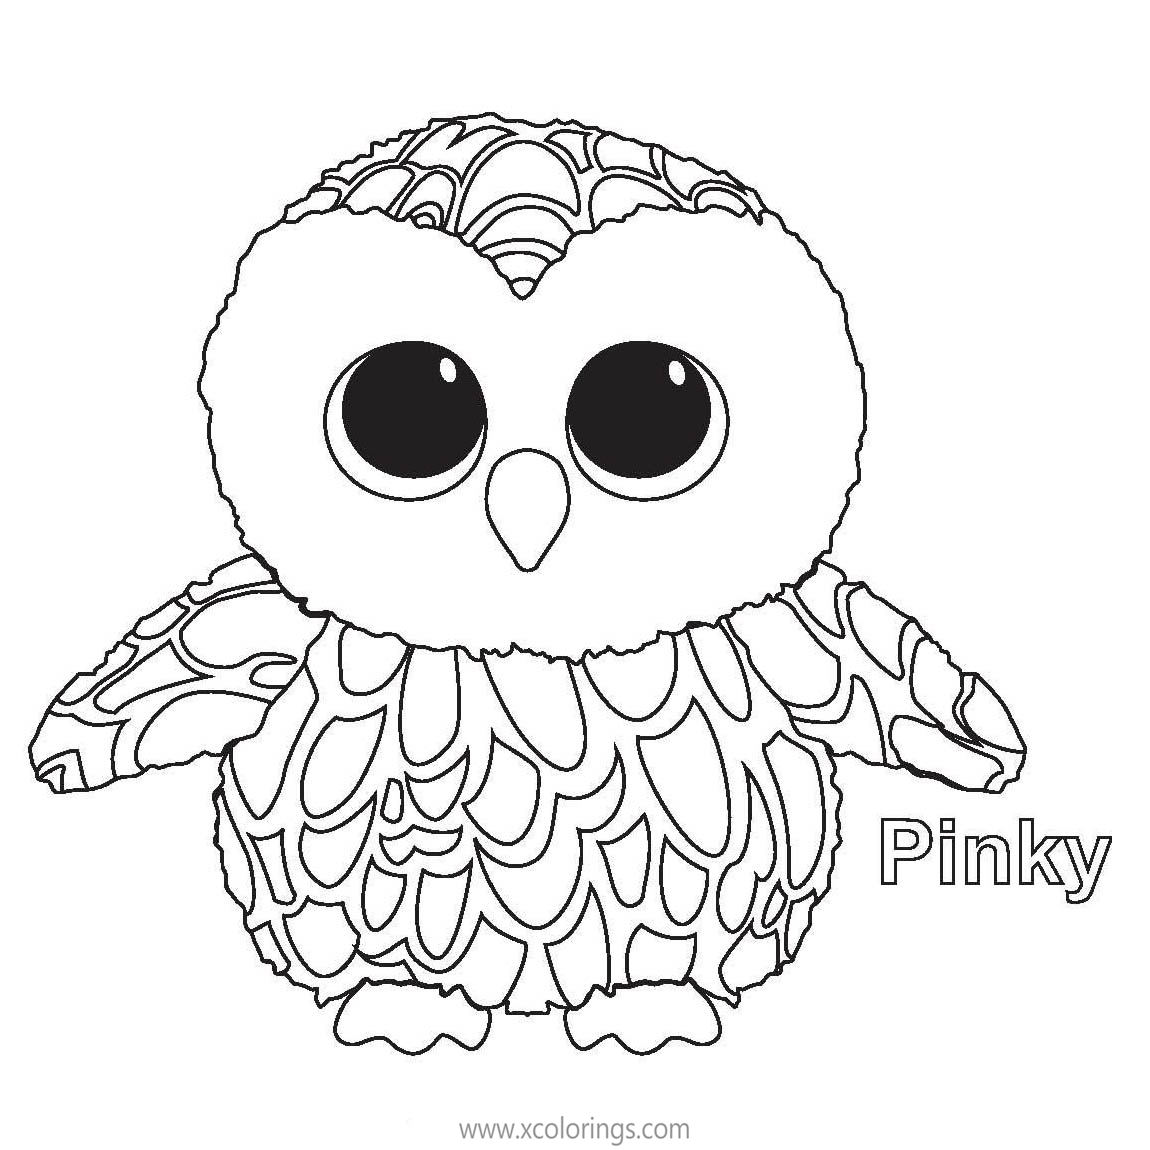 Free Beanie Boos Coloring Pages Owl Pinky printable